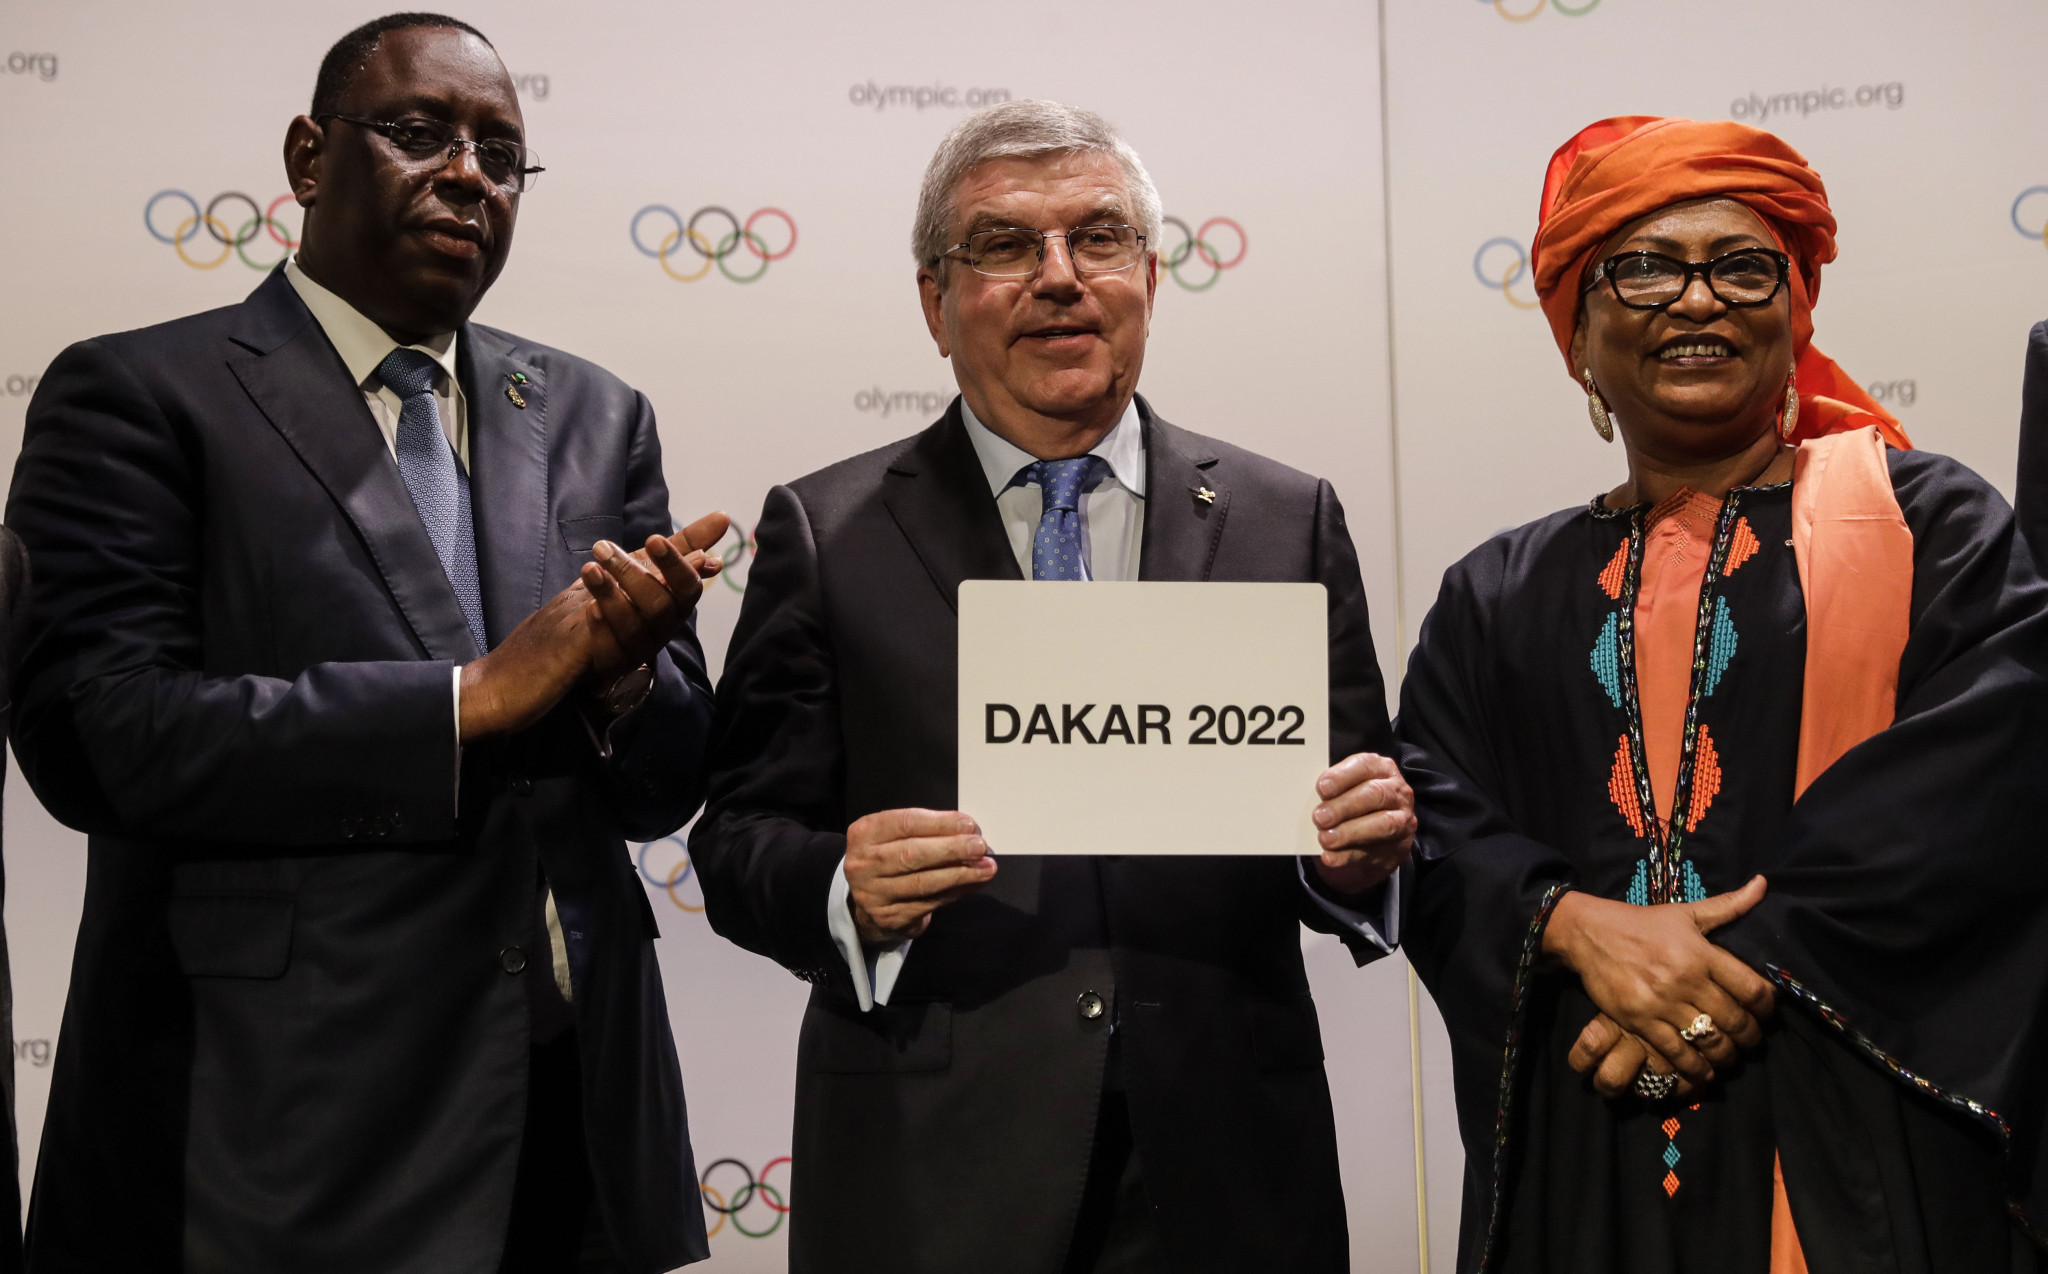 Senegal was awarded the 2022 Summer Youth Olympic Games at the IOC Session in Buenos Aires earlier this month, although details of the event still have to be finalised ©Getty Images